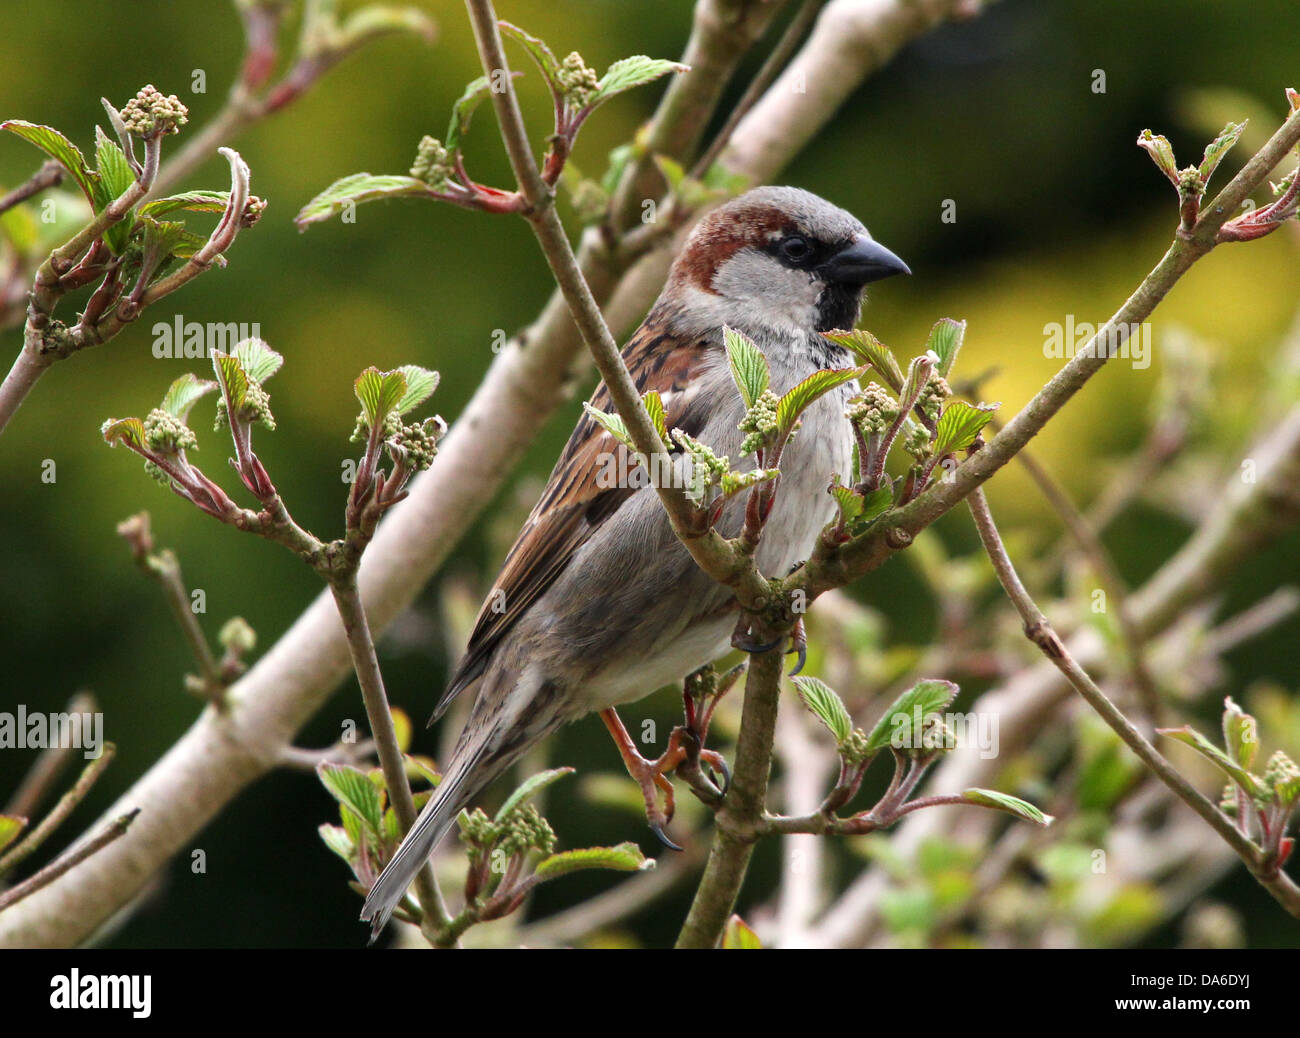 Close-up of a male House Sparrow (Passer domesticus) visiting my garden and balcony  (over 40 images in series) Stock Photo